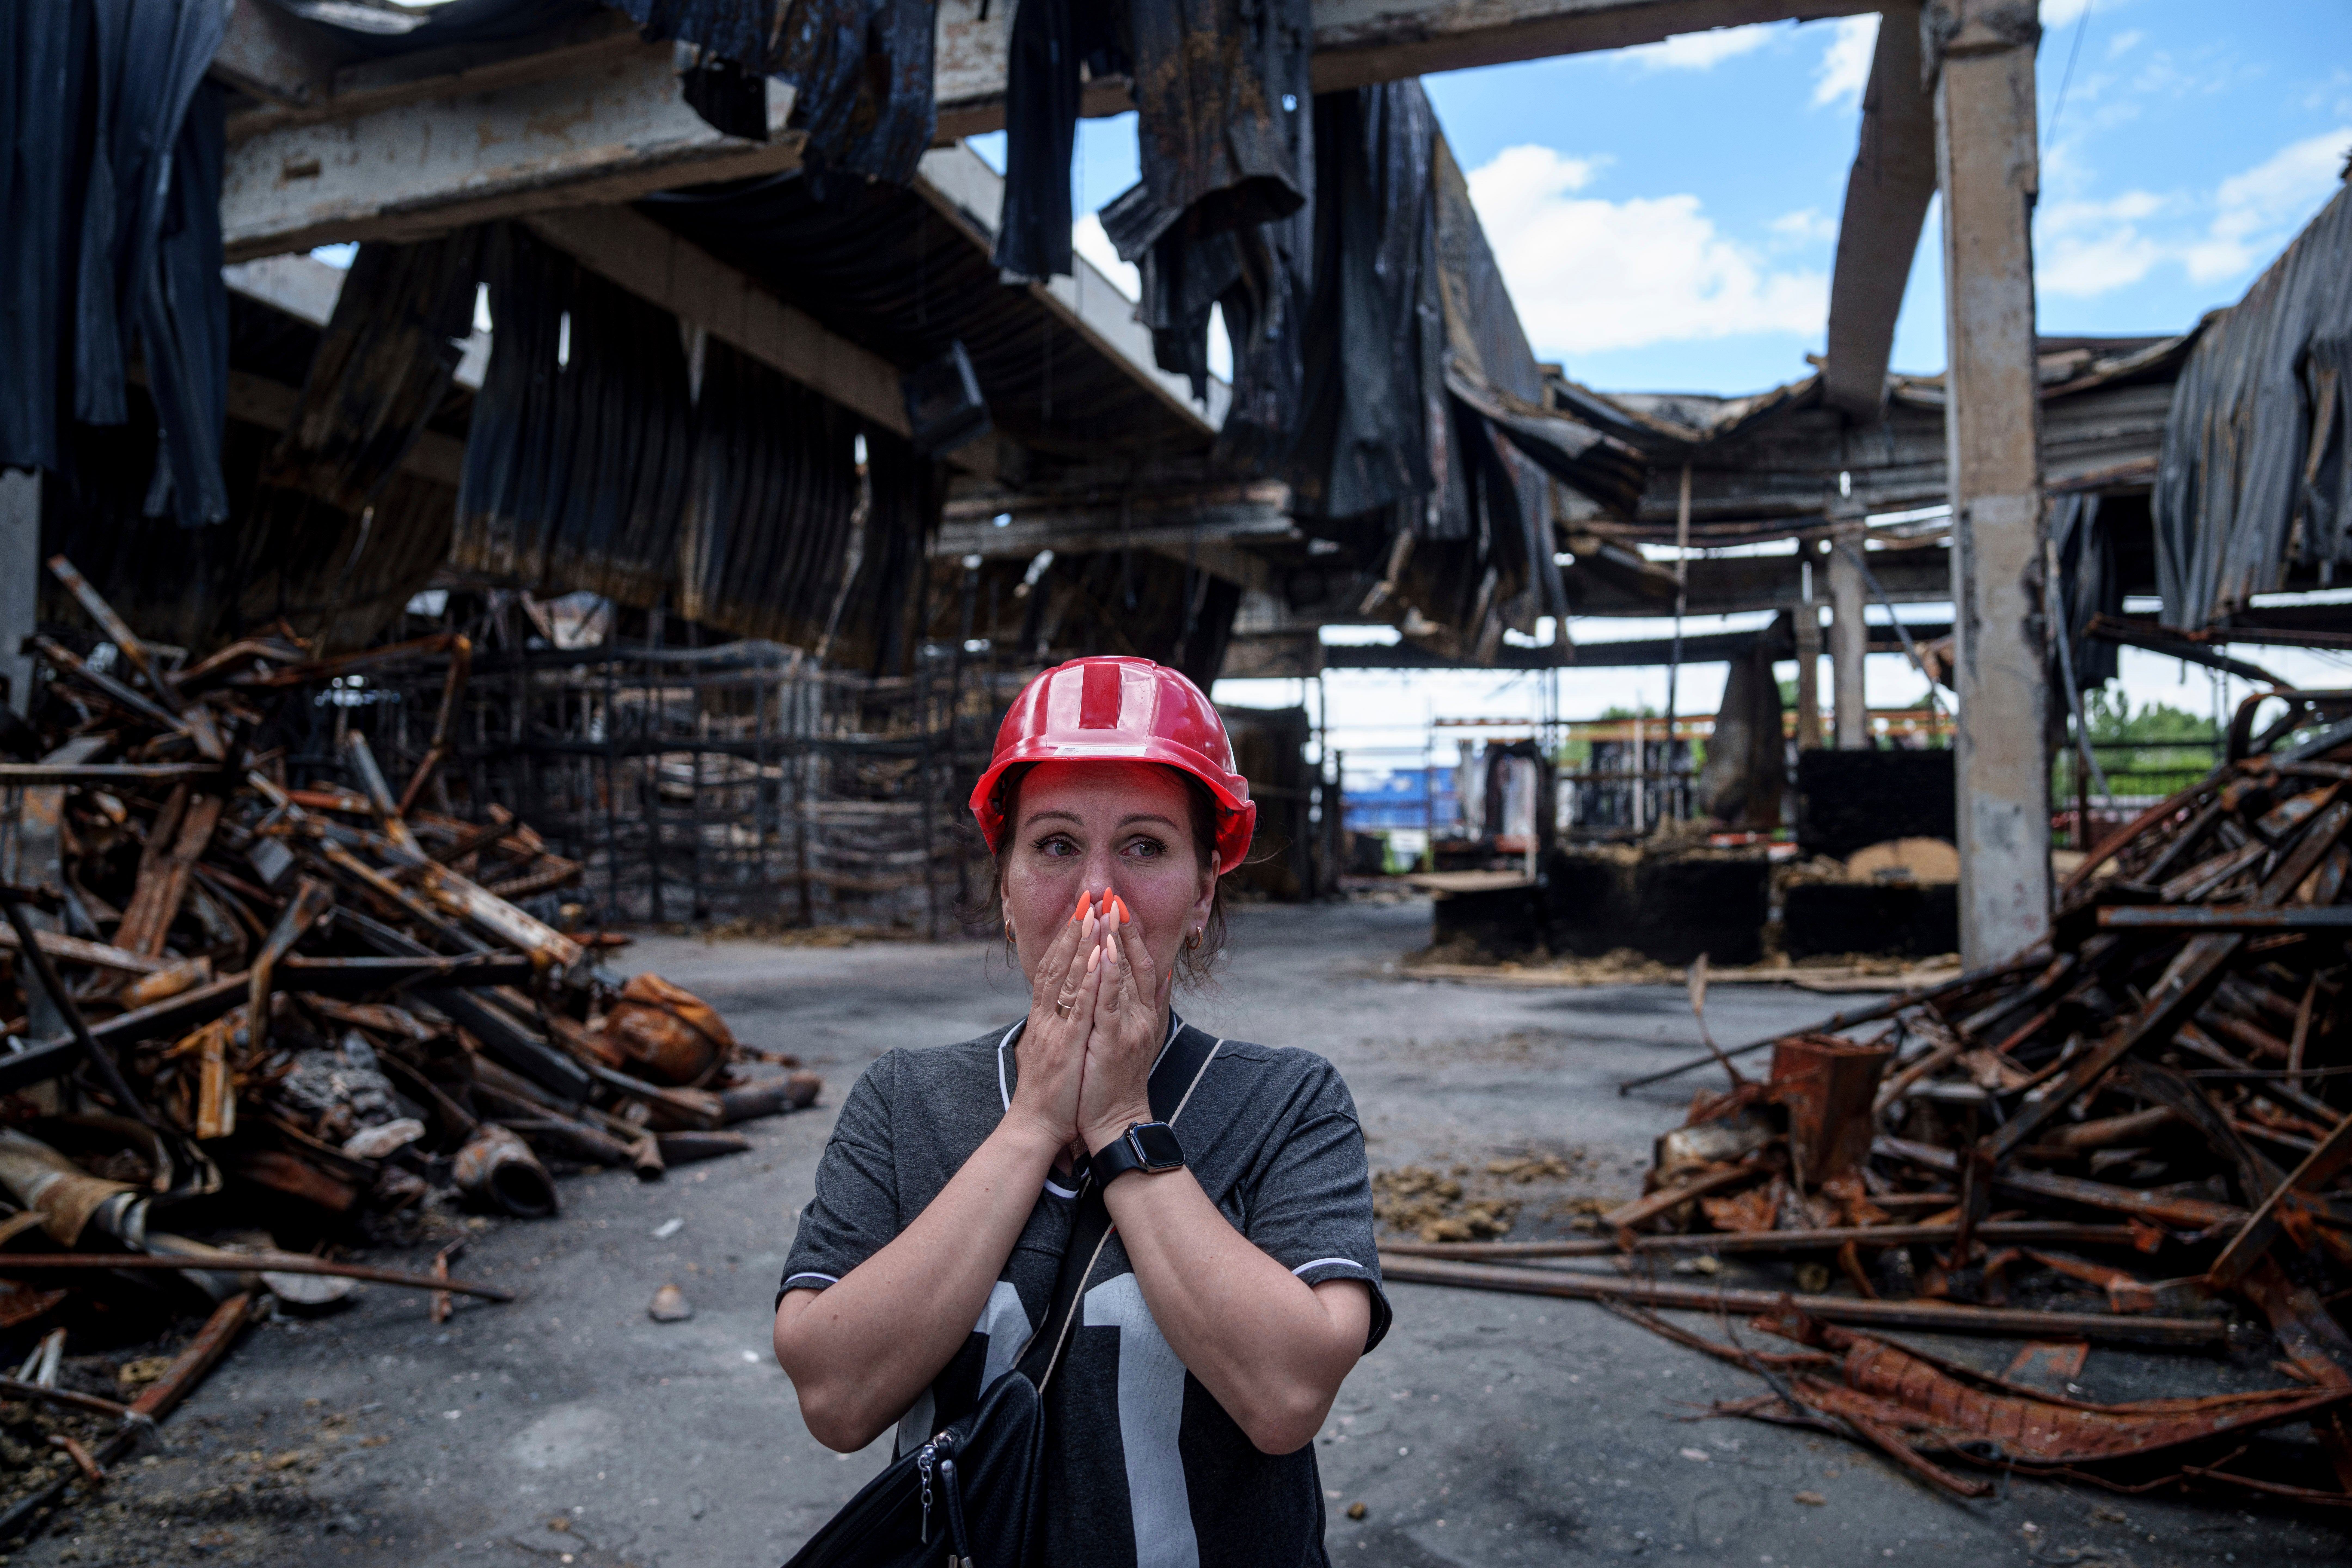 Nina Korsunova gets emotional as she walks inside the destroyed Epicenter shopping complex in Kharkiv, Ukraine, hit by Russian glide bombs earlier this month. At least 11 people were killed.